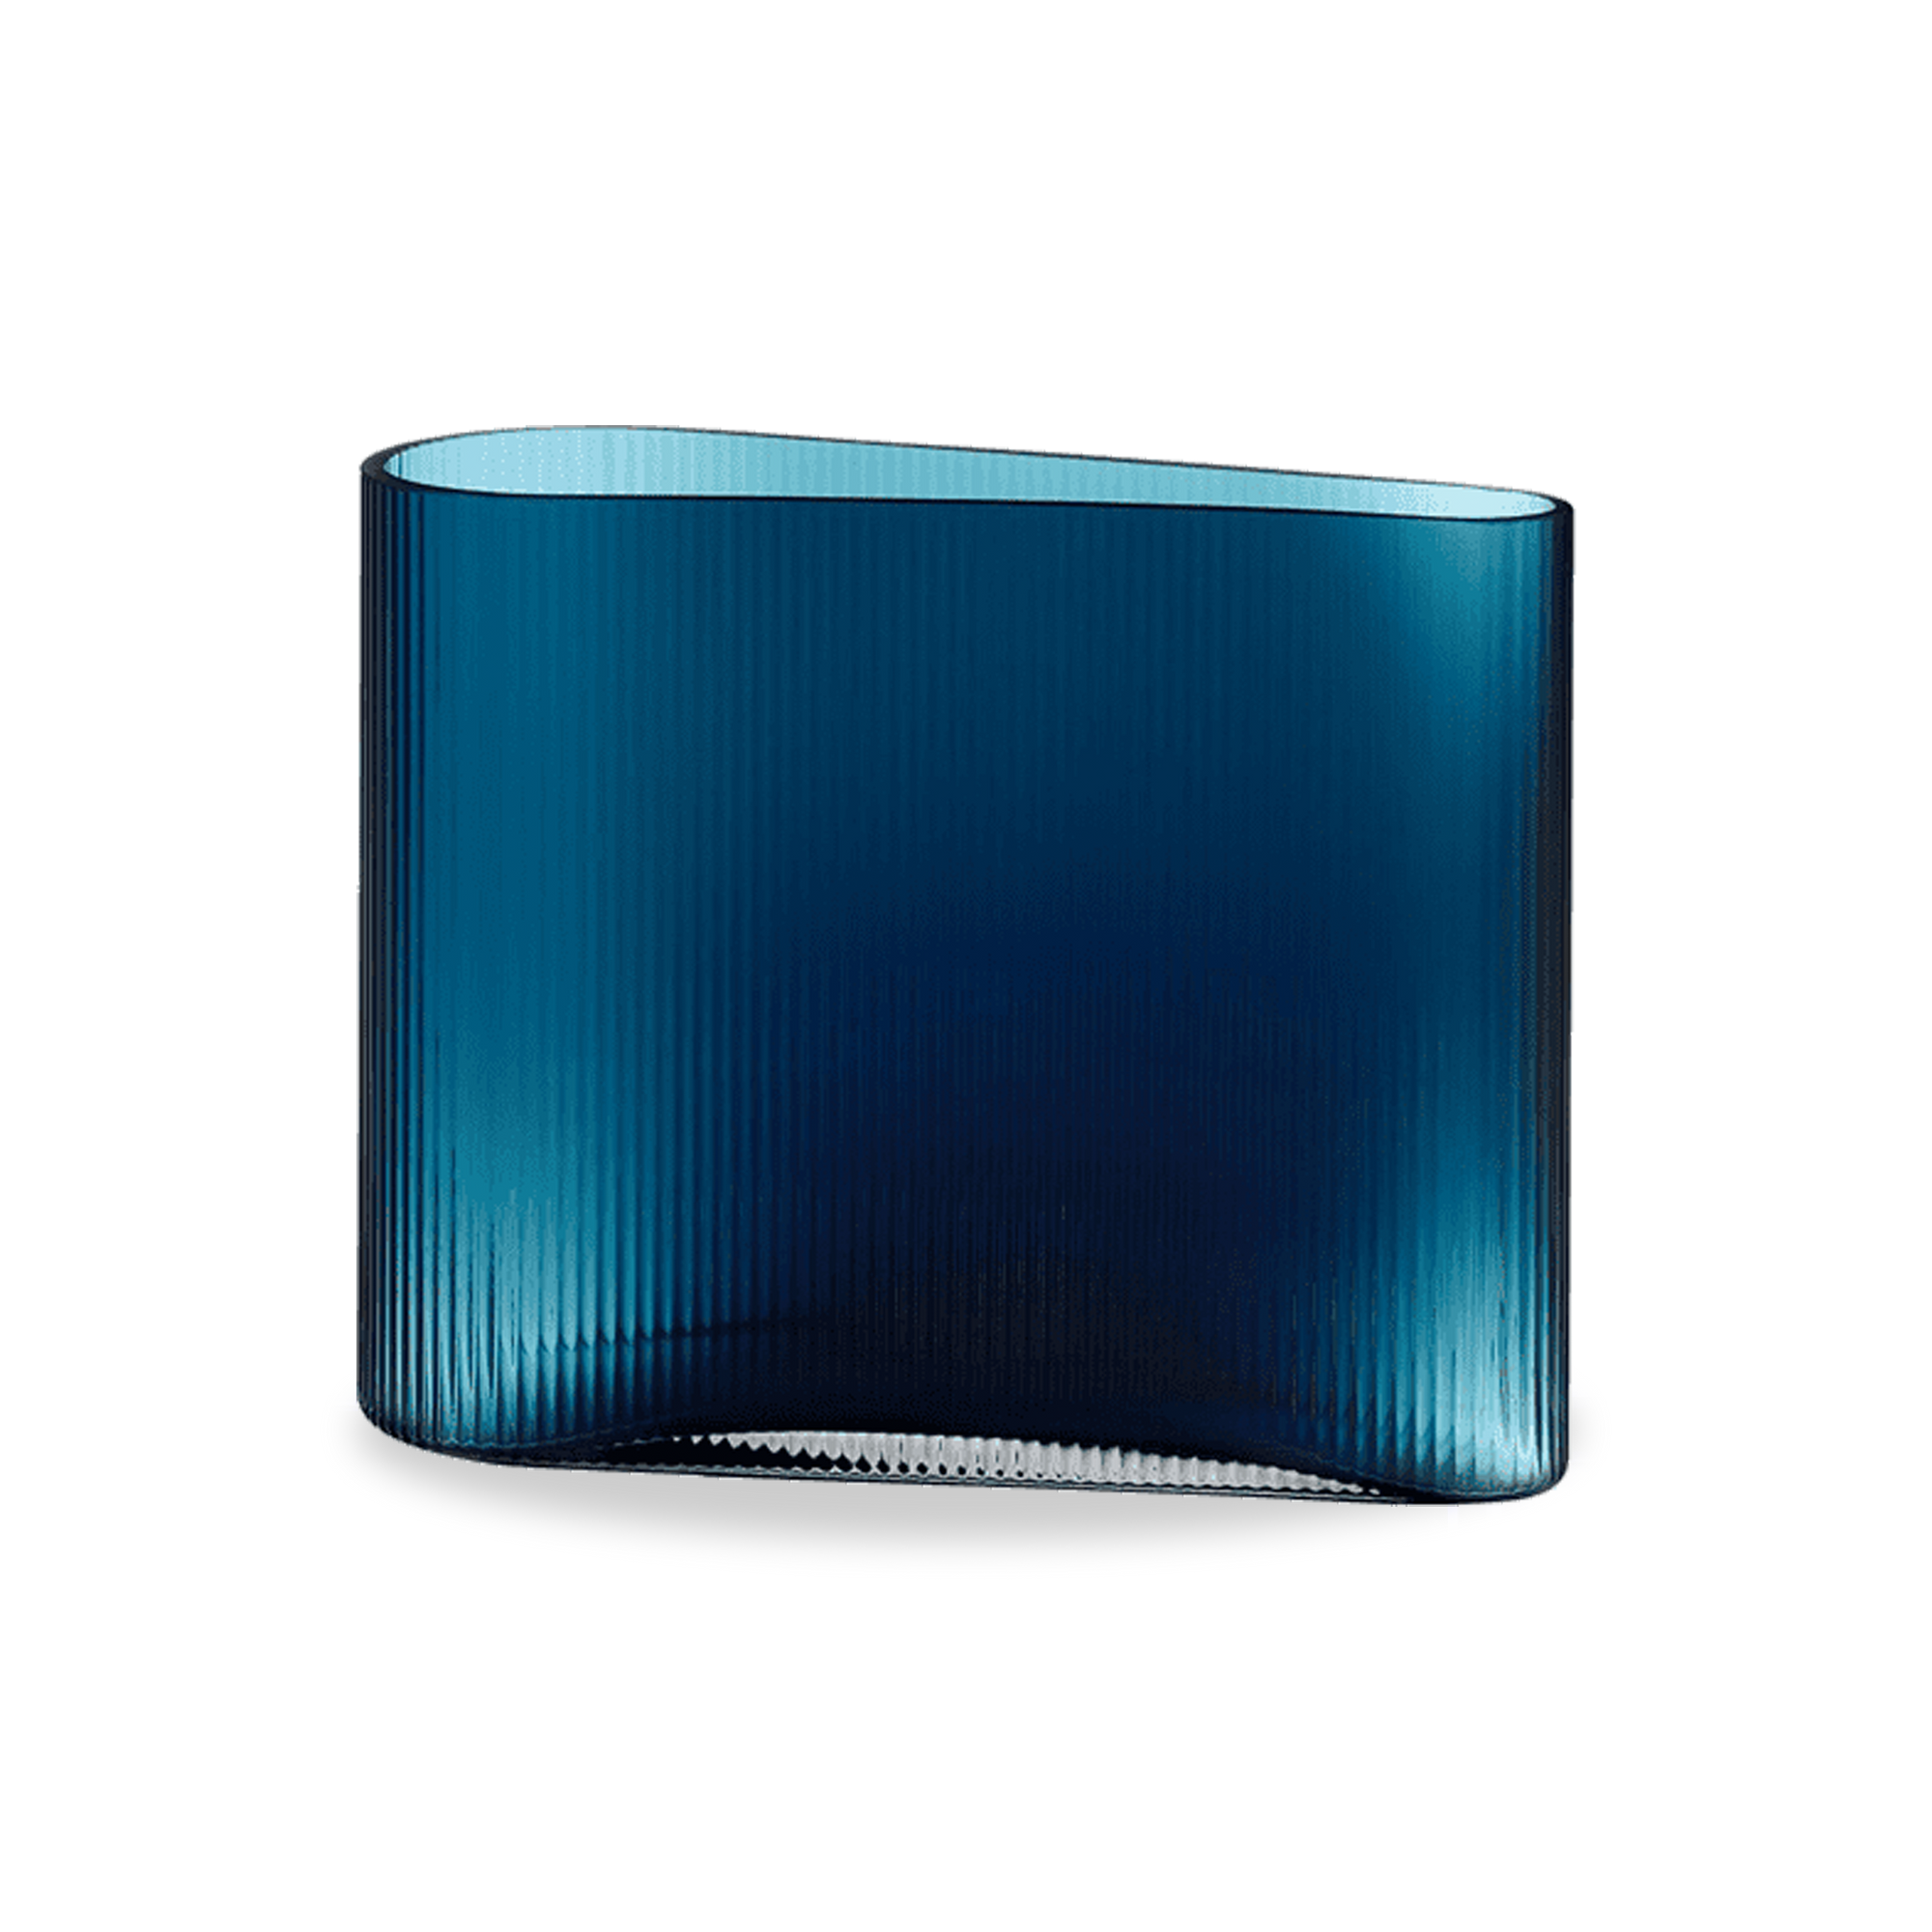 The Mist Vase in petroleum is made in an extraordinary clear yet corrugated glass.